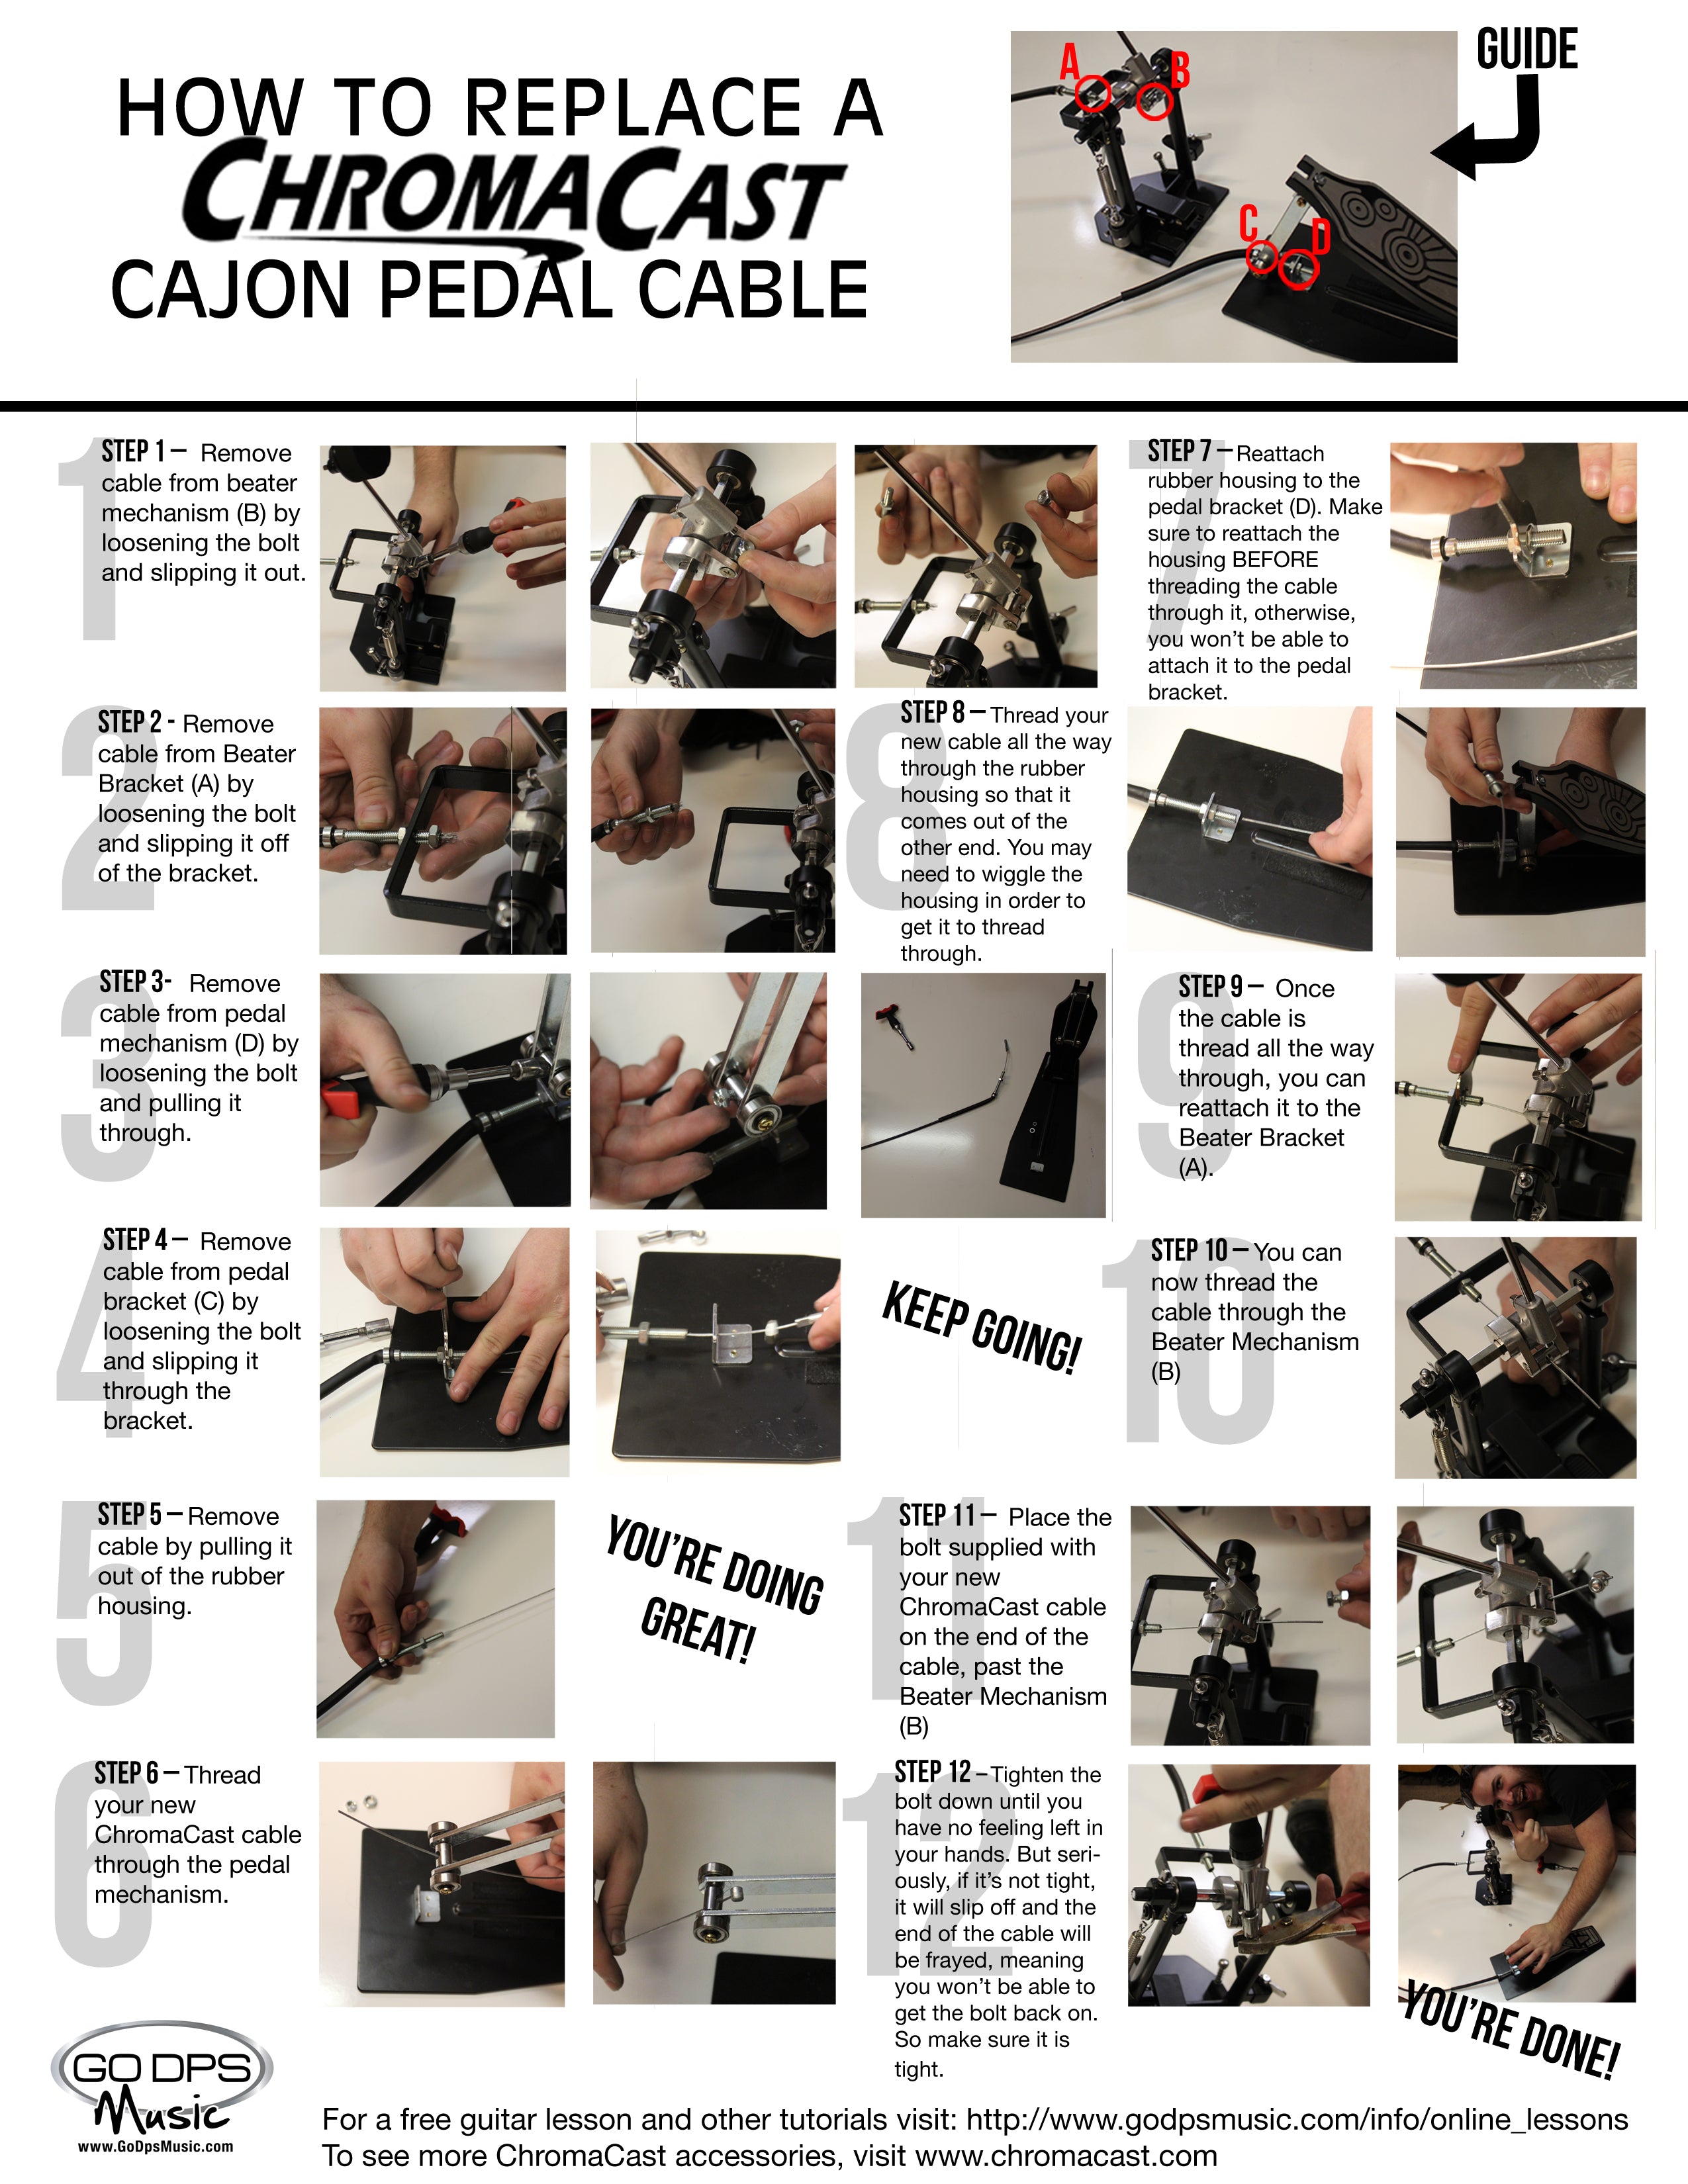 Cajon Pedal Cable Replacement